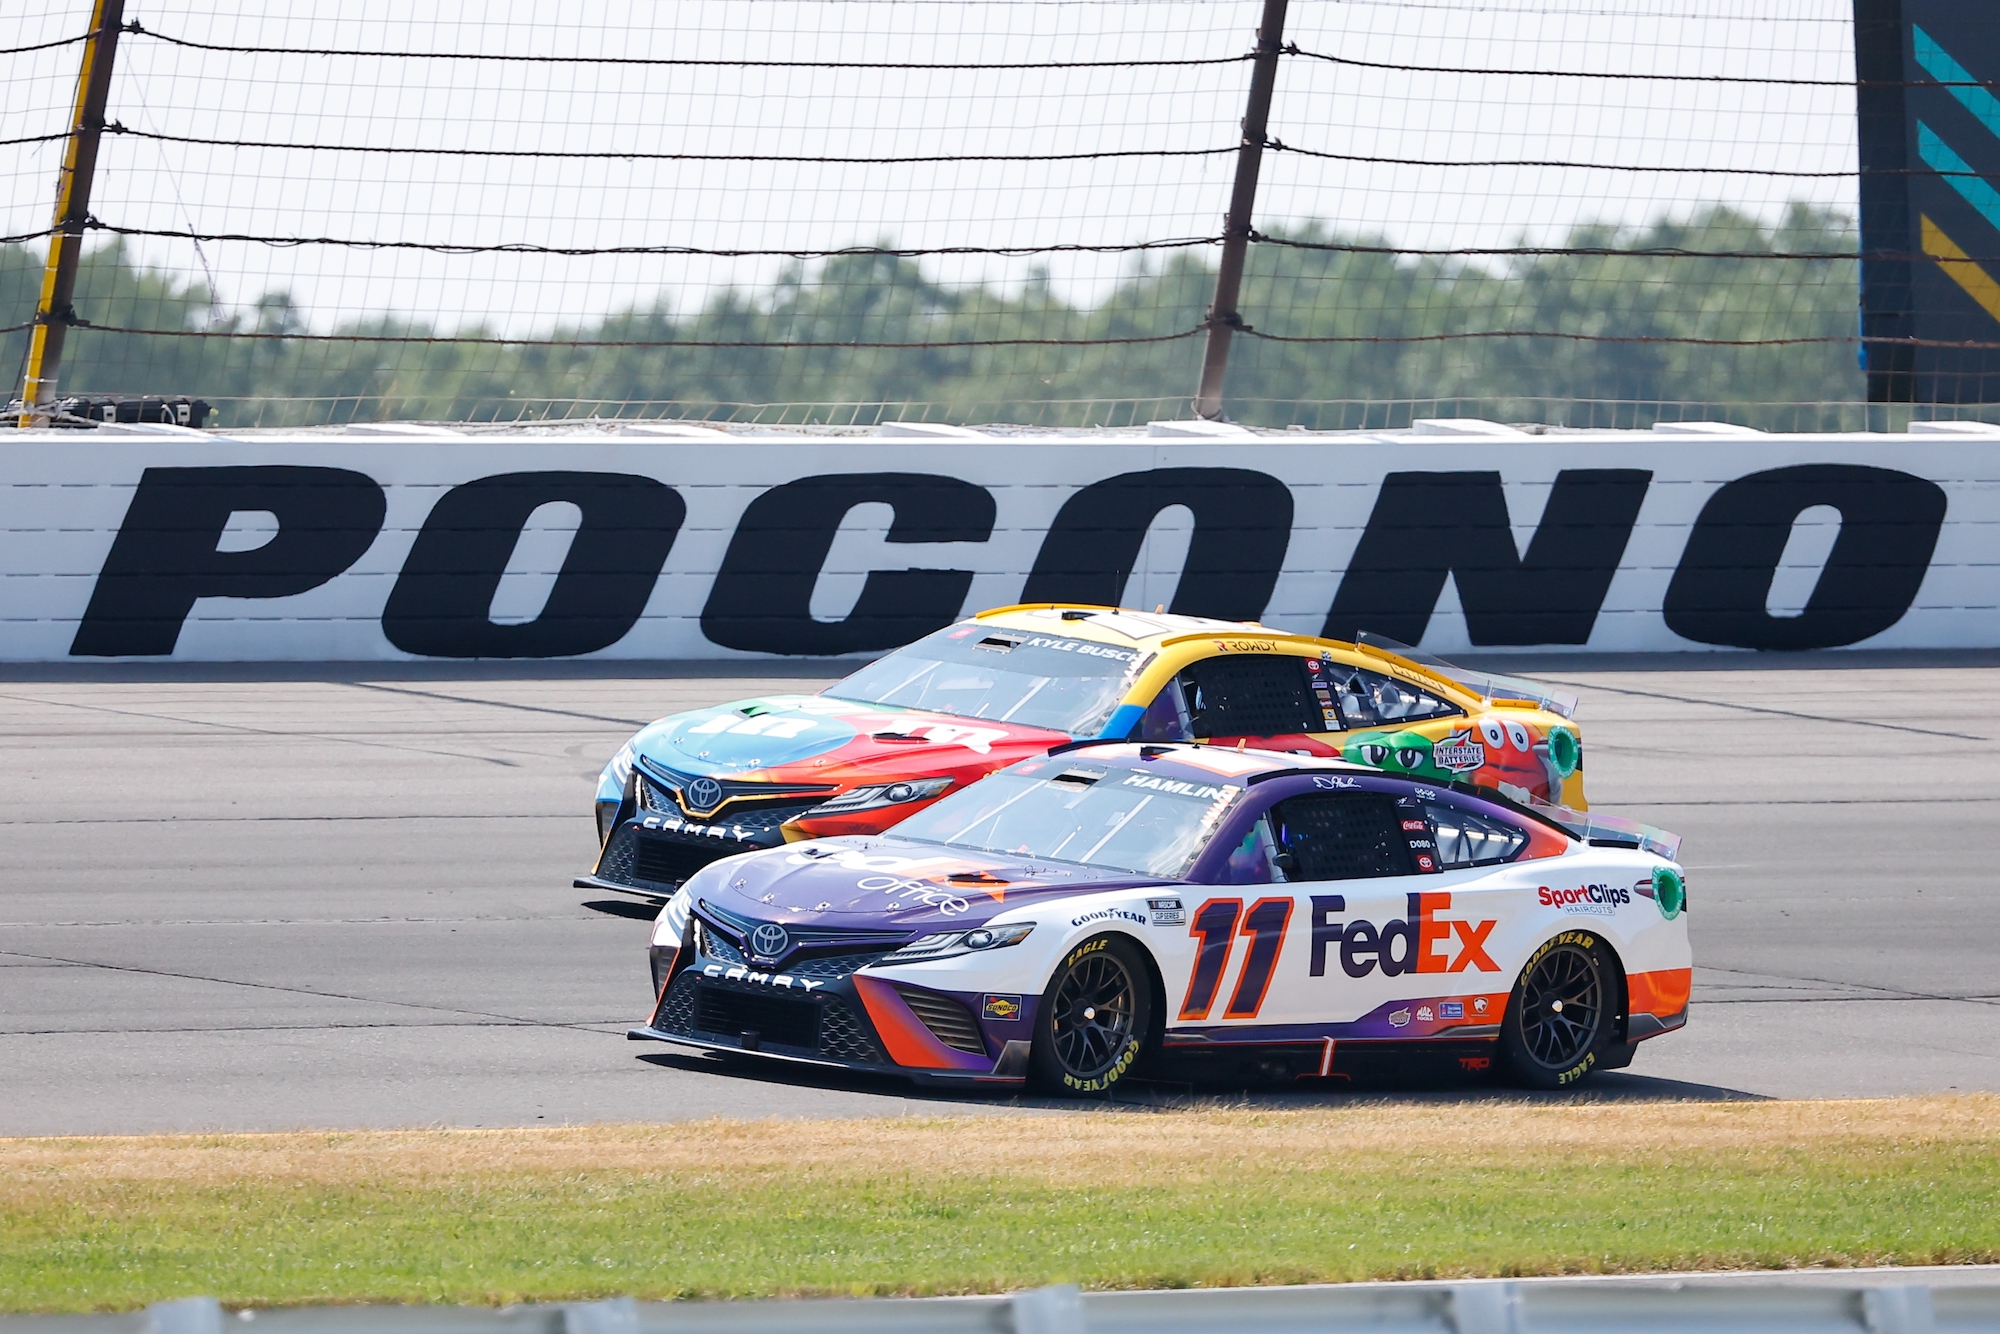 Denny Hamlin and Kyle Busch Were Ratted Out By Another Team, Resulting in Disqualification, According to Cup Series Driver